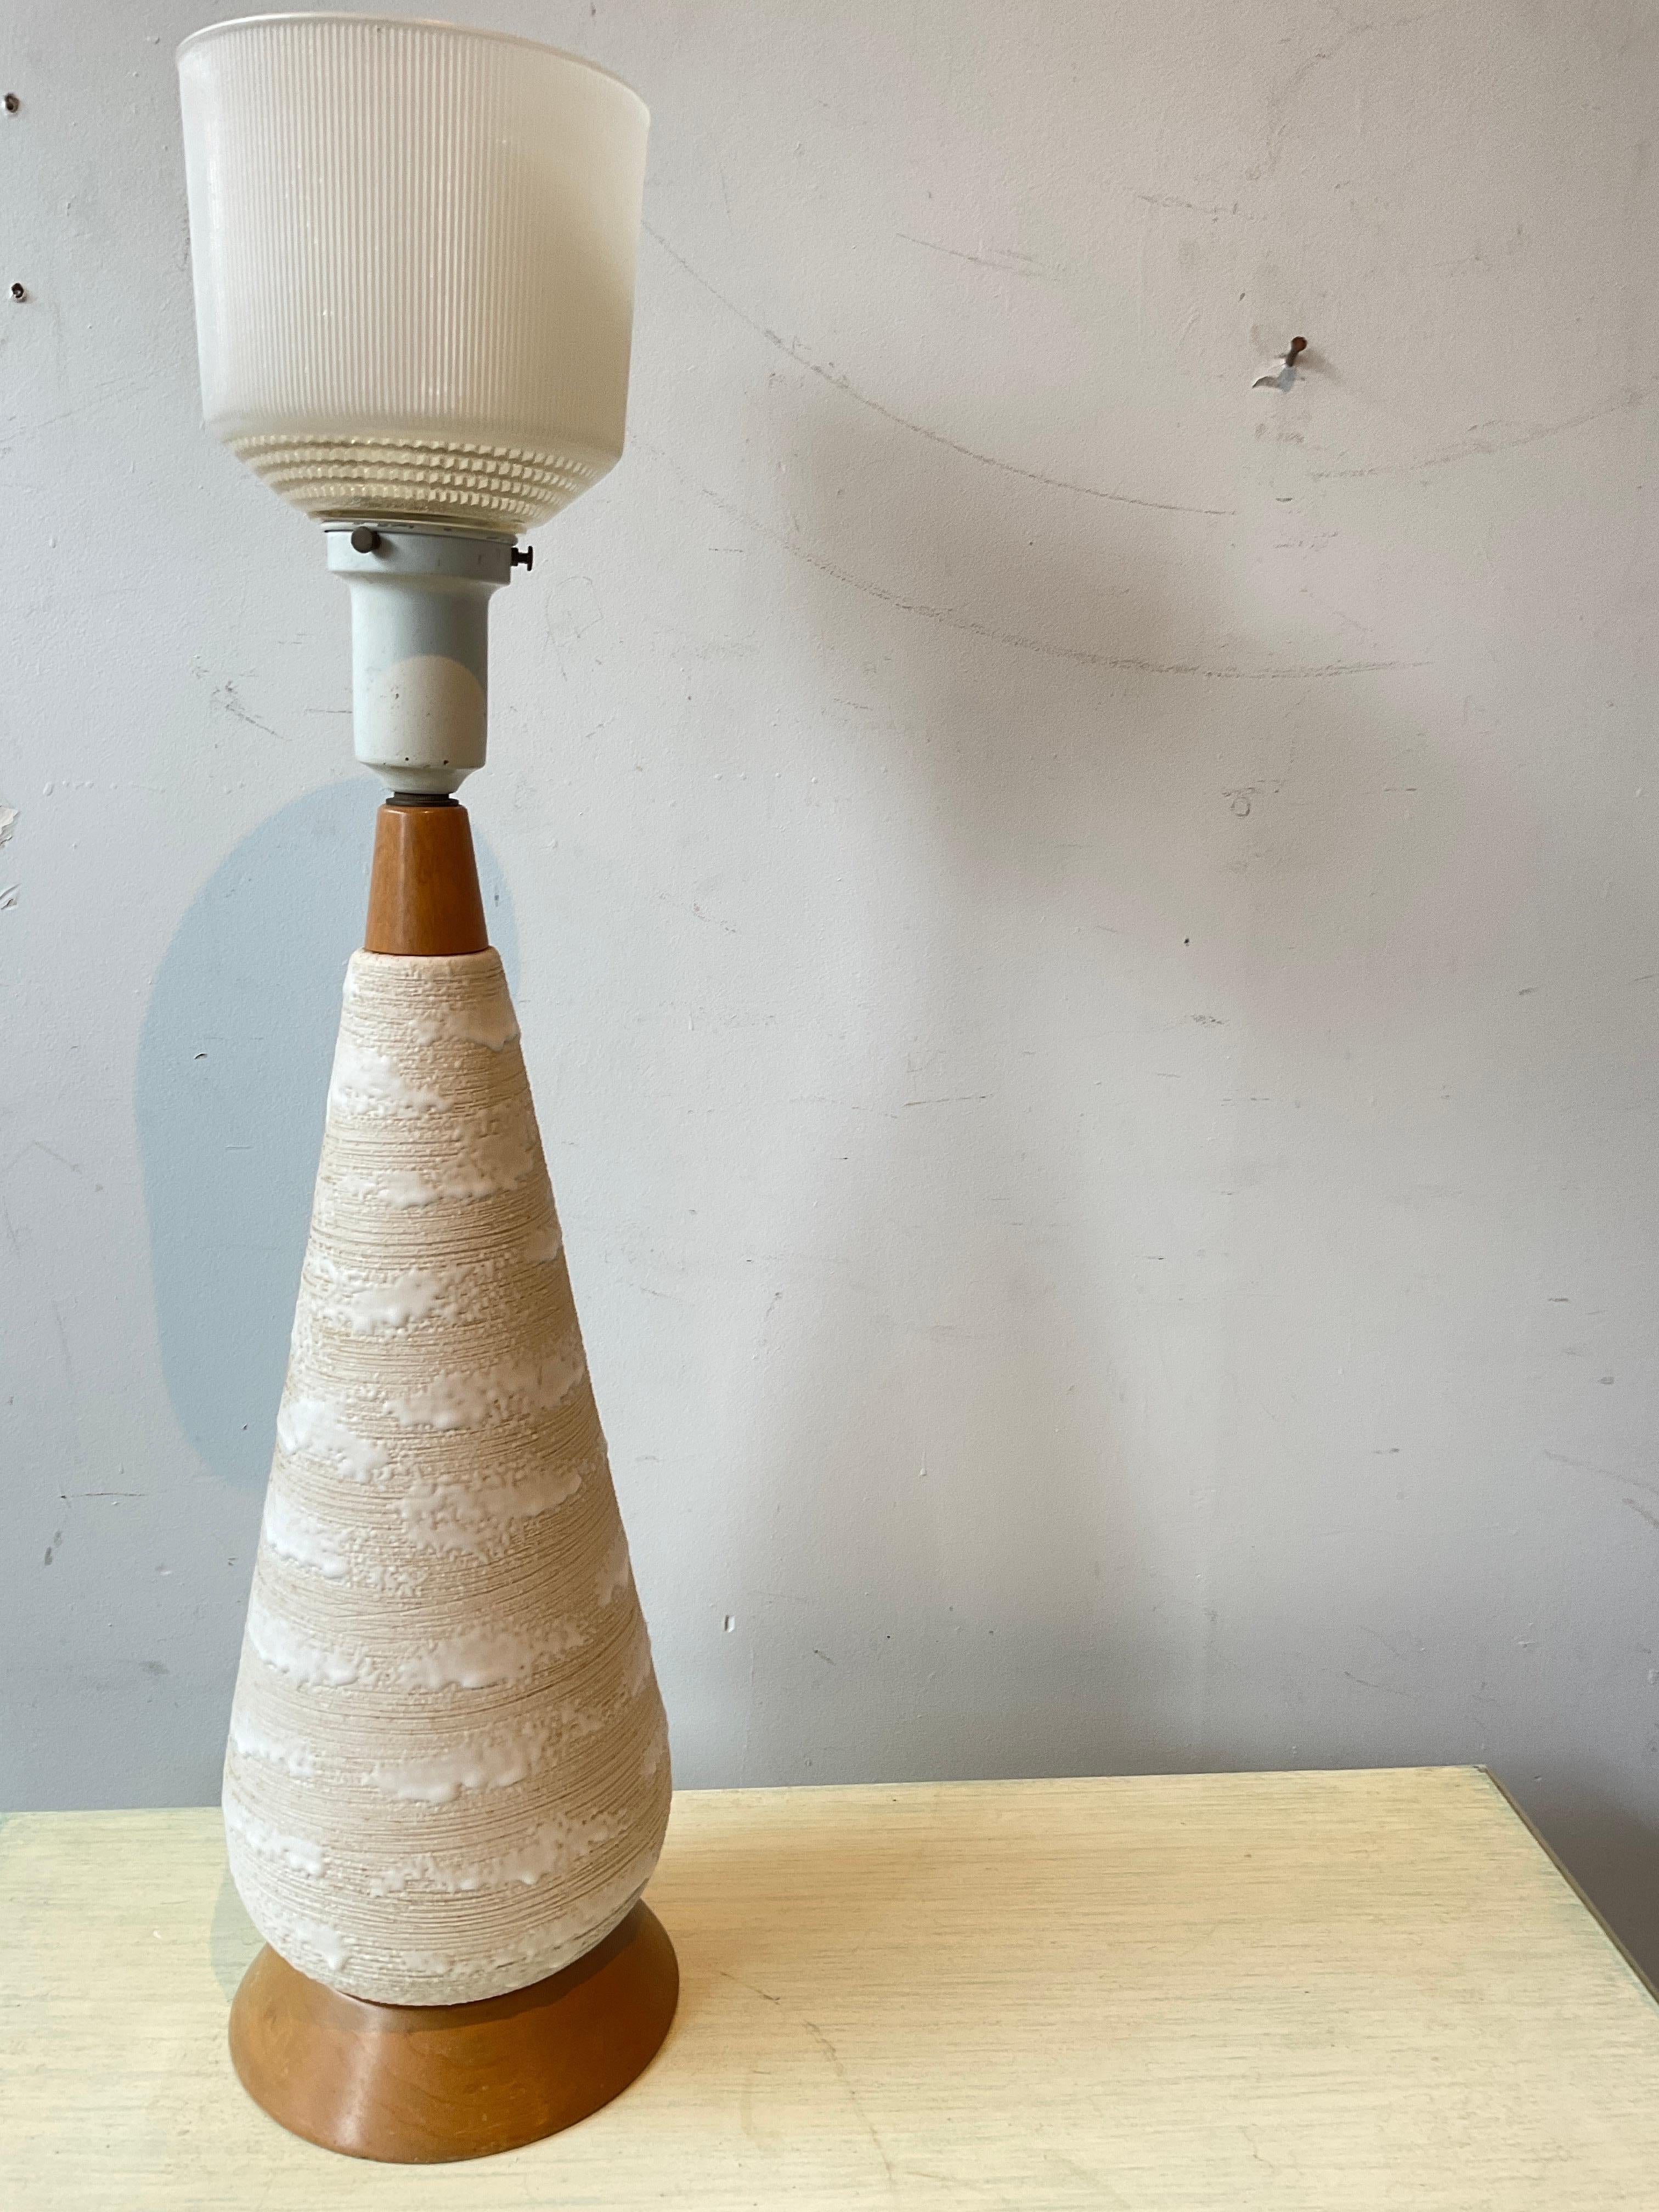 1950s Textured ceramic table lamp on wood base.
Height Is to top of glass shade.
Lamp needs rewiring.